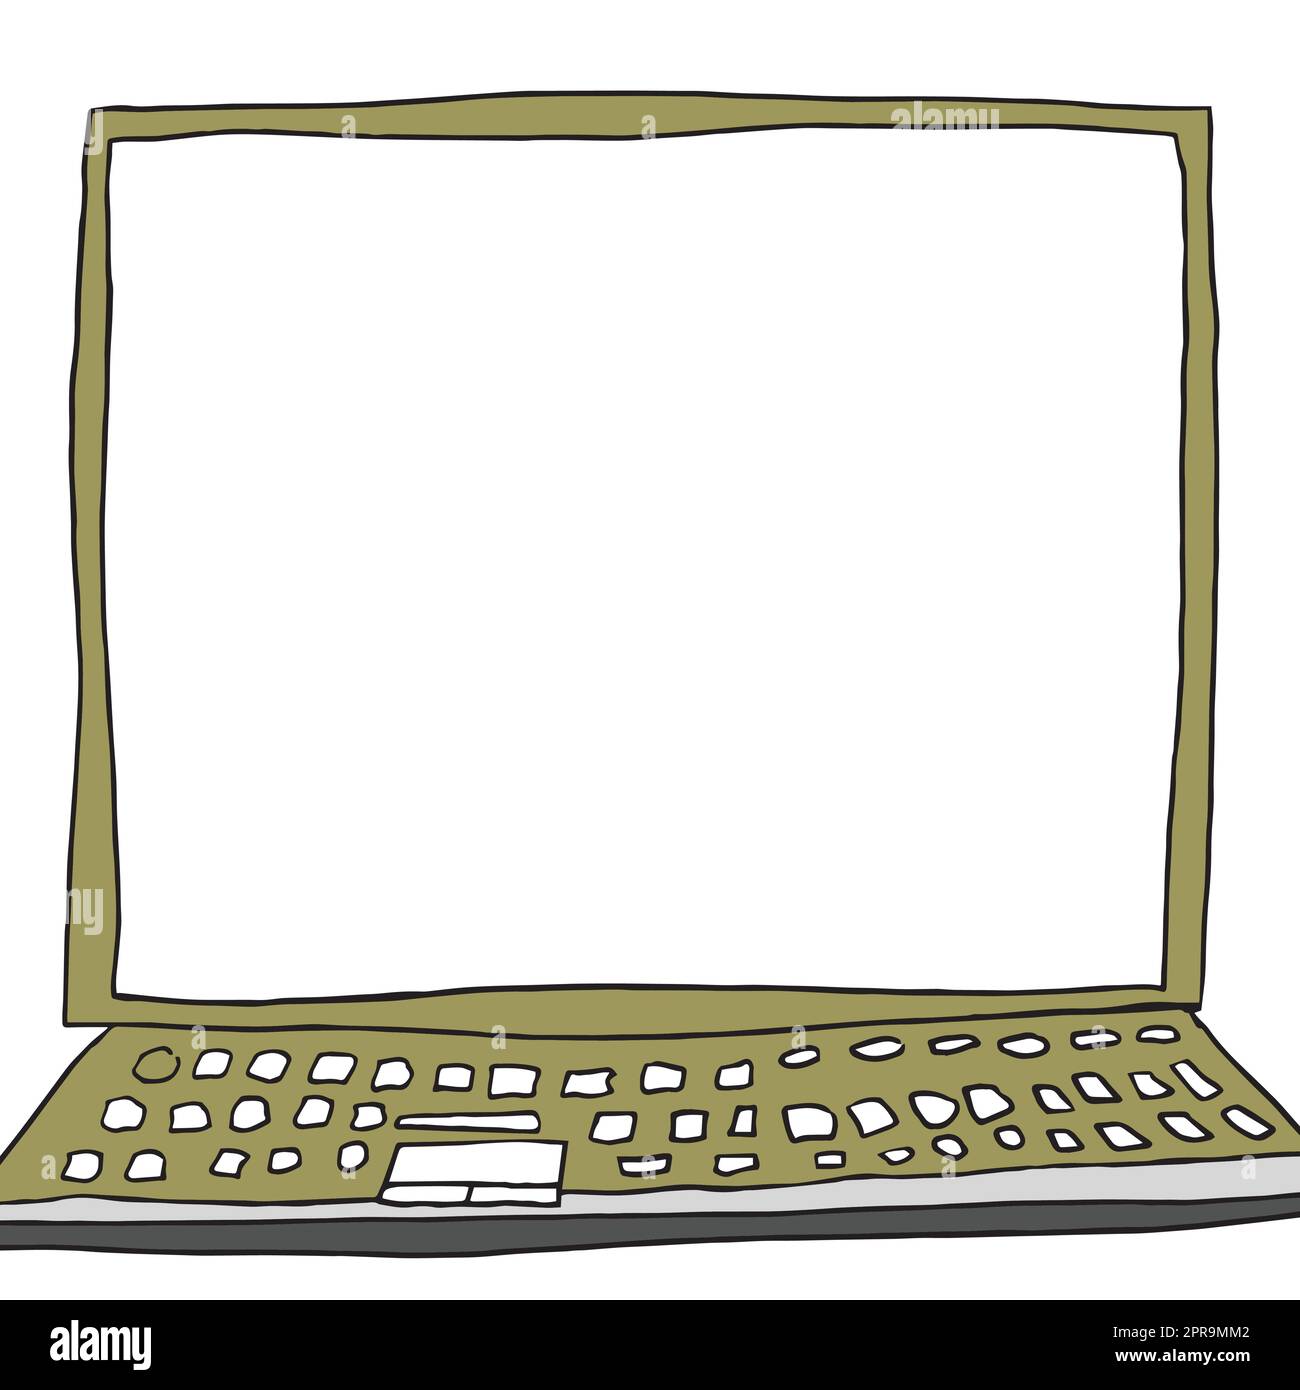 640 Computer Drawing Printable Royalty-Free Photos and Stock Images |  Shutterstock